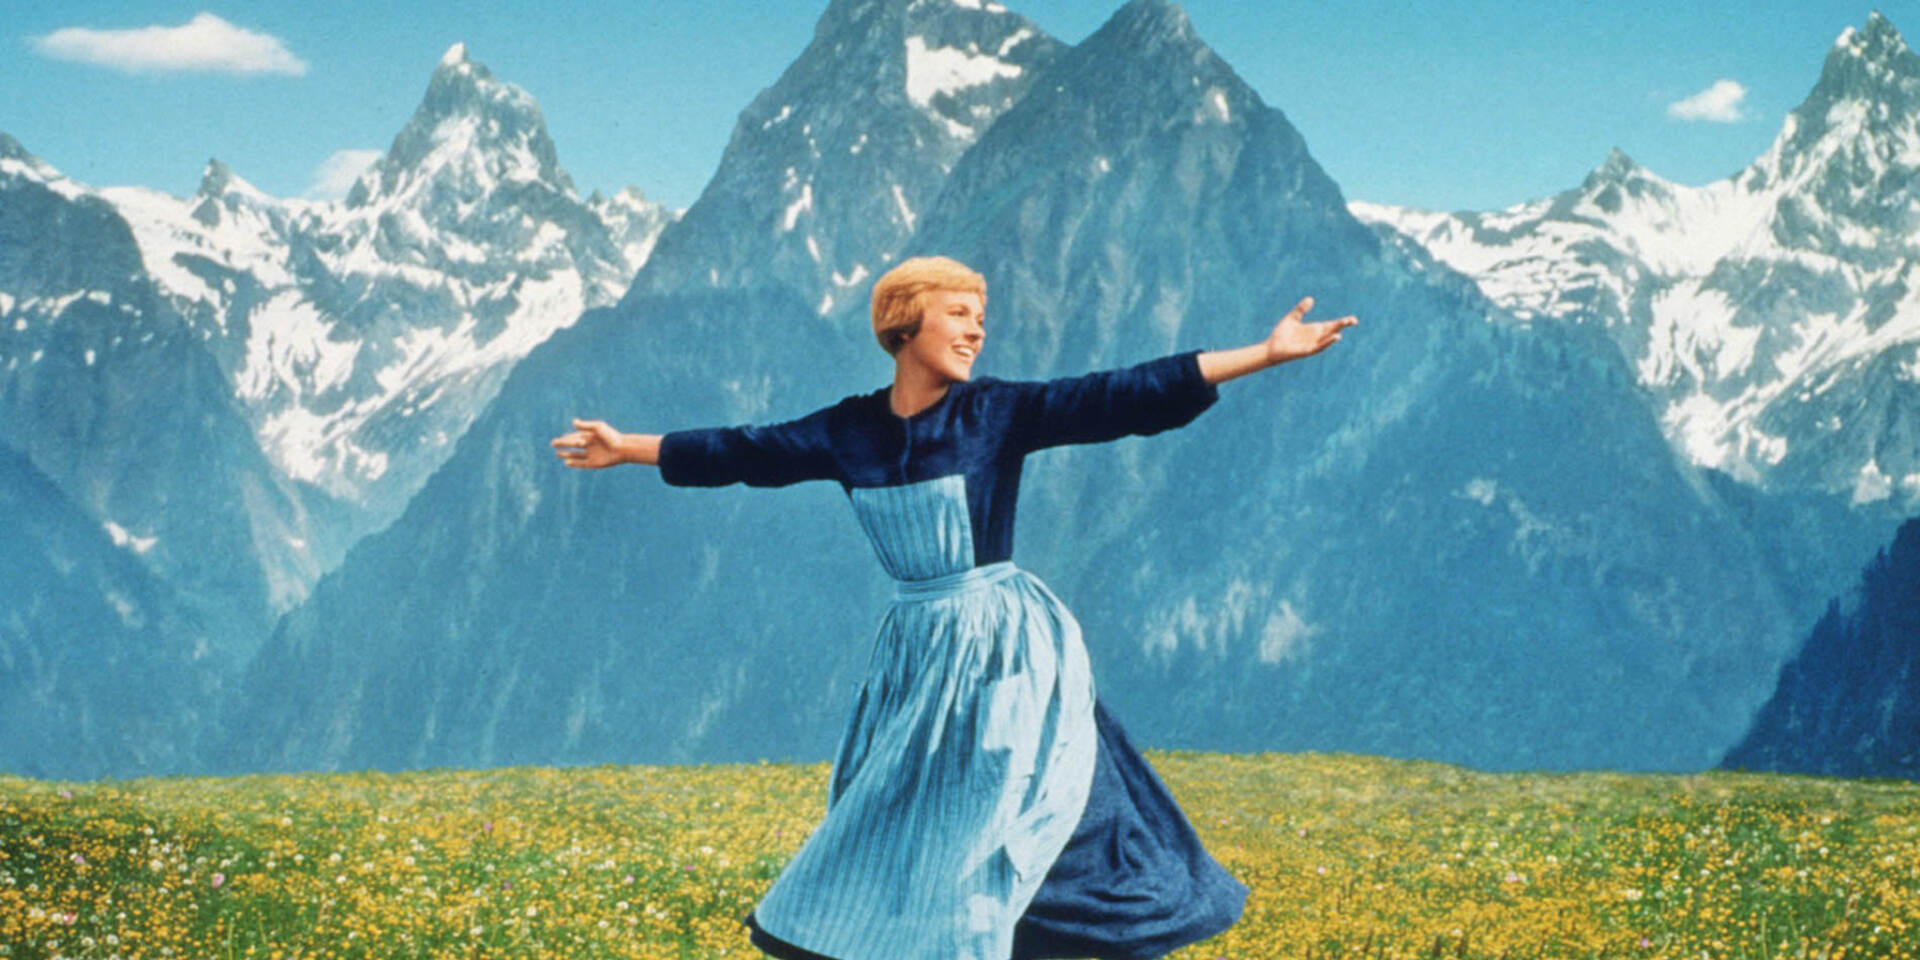 The Sound of Music film - Maria on the hill © 20th Century Fox